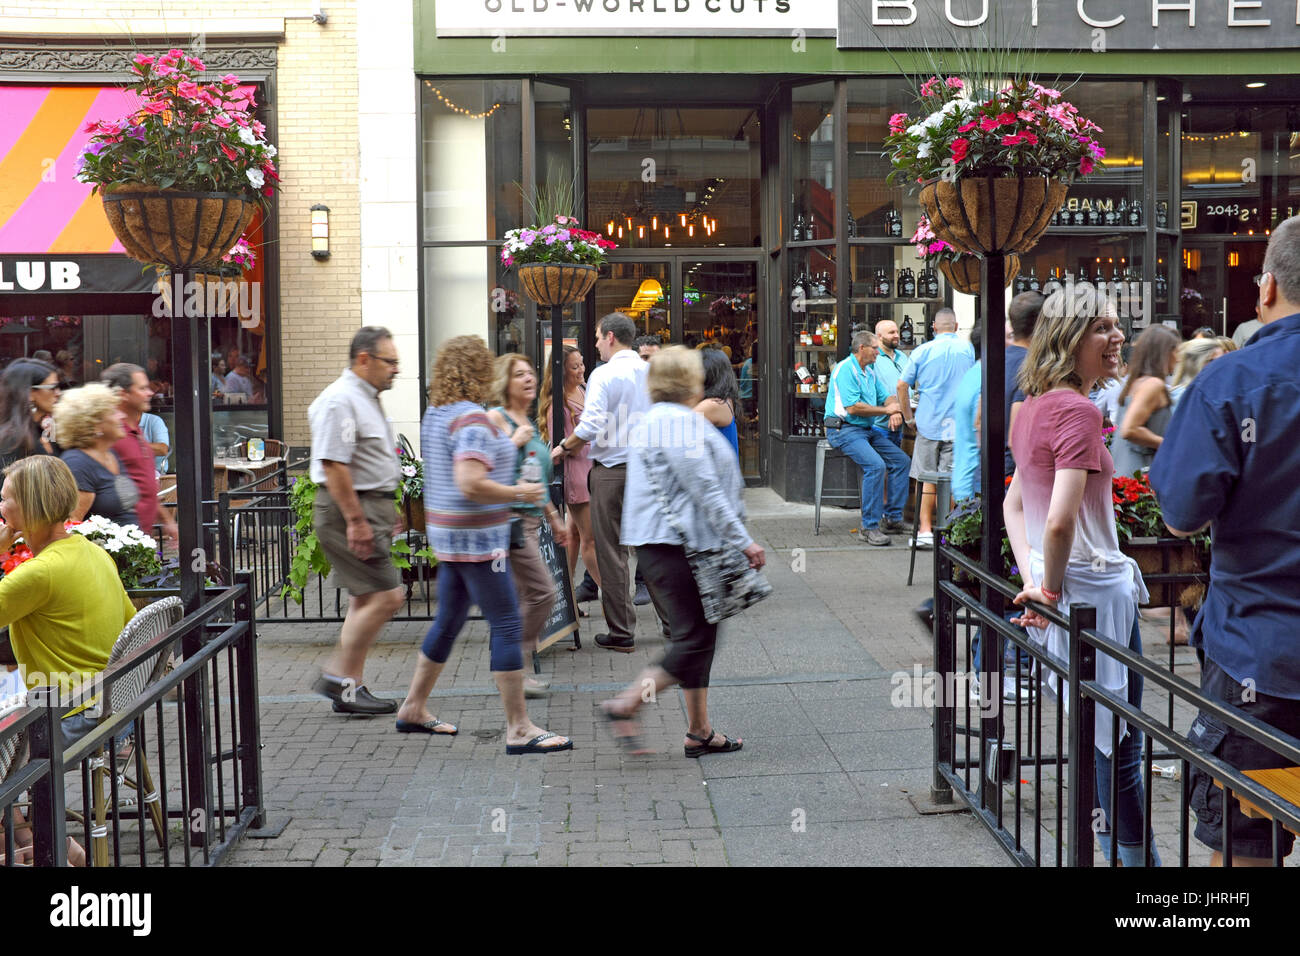 Pedestrian-only East 4th in downtown Cleveland, Ohio, is one of several entertainment districts in the area catering to visitors and residents. Stock Photo